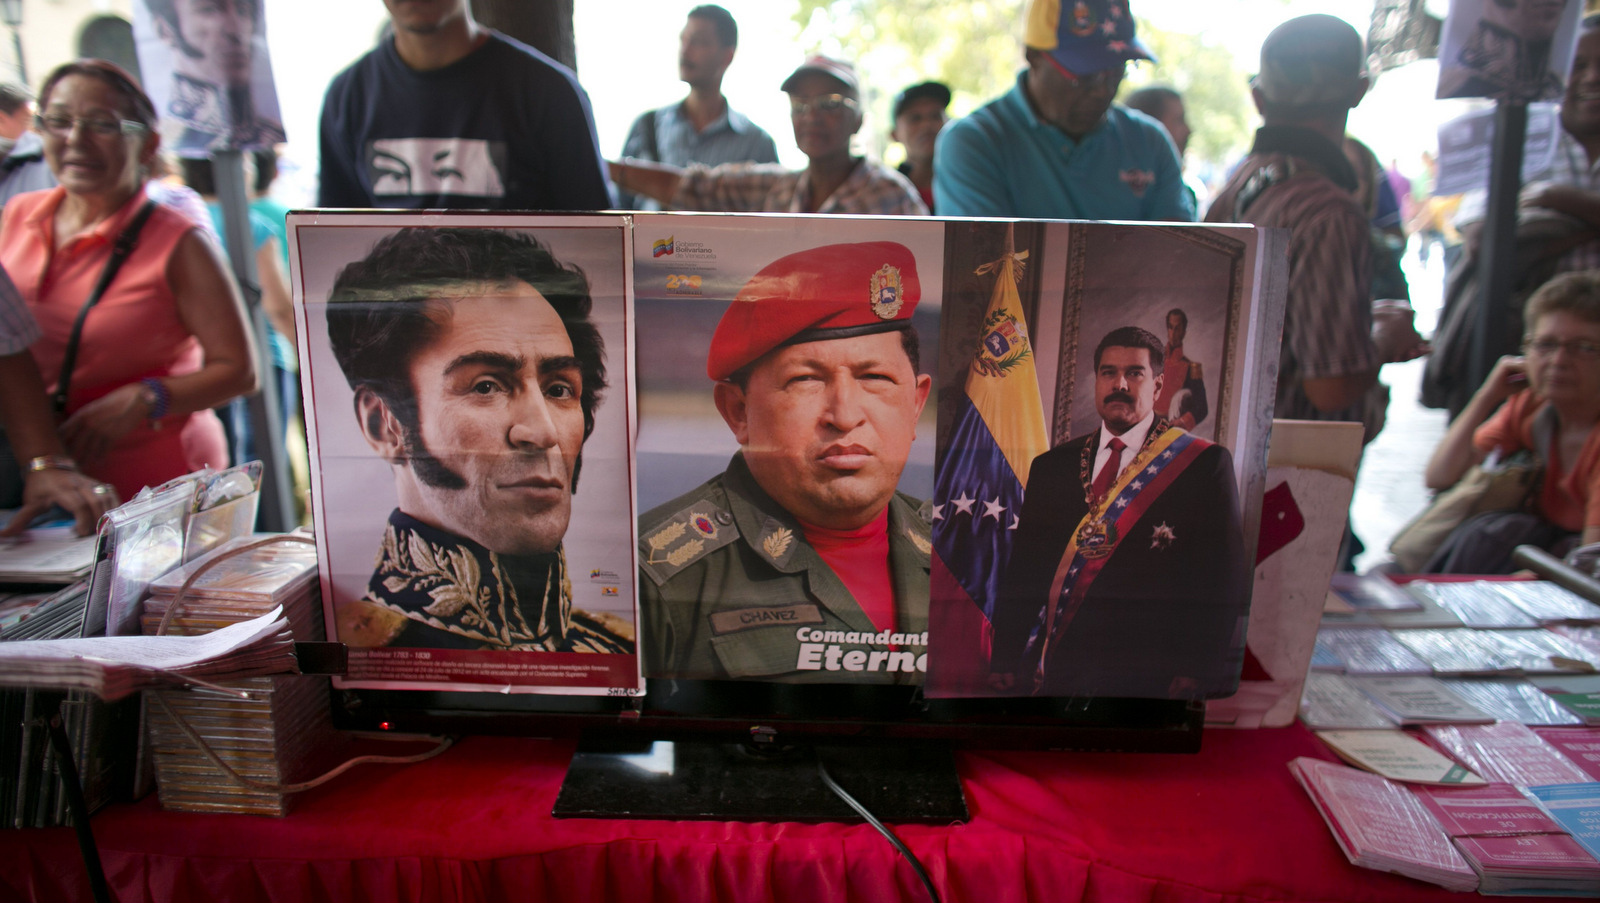 Pictures of Venezuela's independence hero Simon Bolivar, left, Venezuela's late president Hugo Chavez, center, and Venezuela's President Nicolas Maduro are seen pasted on a television screen outside of the National Assembly building during a session in Caracas, Venezuela, Thursday, Dec. 10, 2015. Venezuela's ruling socialist party is set to rush through a series of appointments before the opposition takes over congress next month with promises to revive what it calls a moribund institution. The legislature was expected to name 12 Supreme Court justices Thursday during a final session, filling vacancies left by a group of judges who requested early retirement. (AP Photo/Ariana Cubillos)